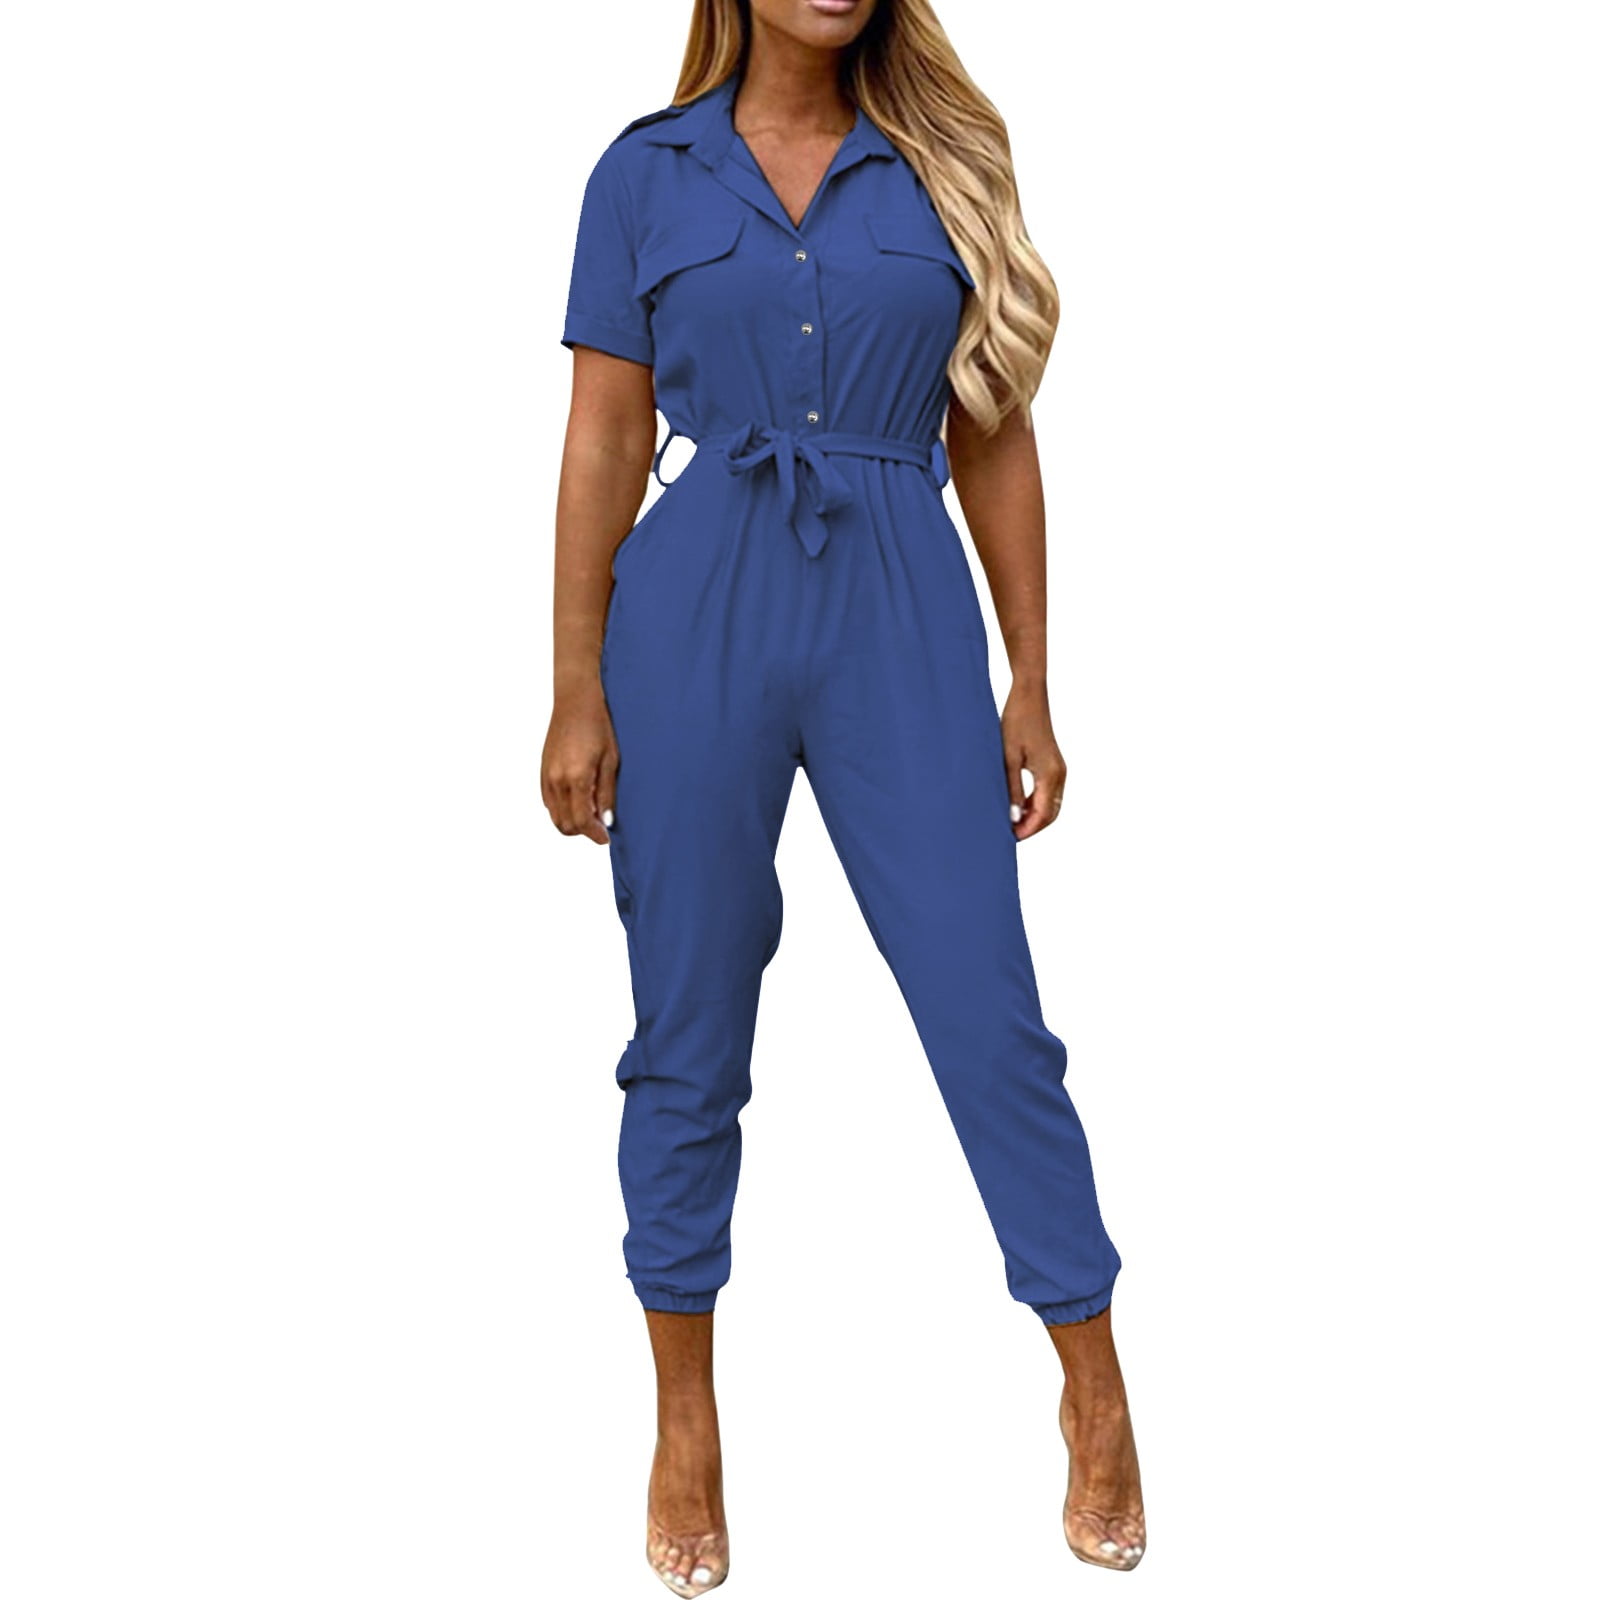 Jumpsuits Styled Casually for Everyday Wear for Women over 50